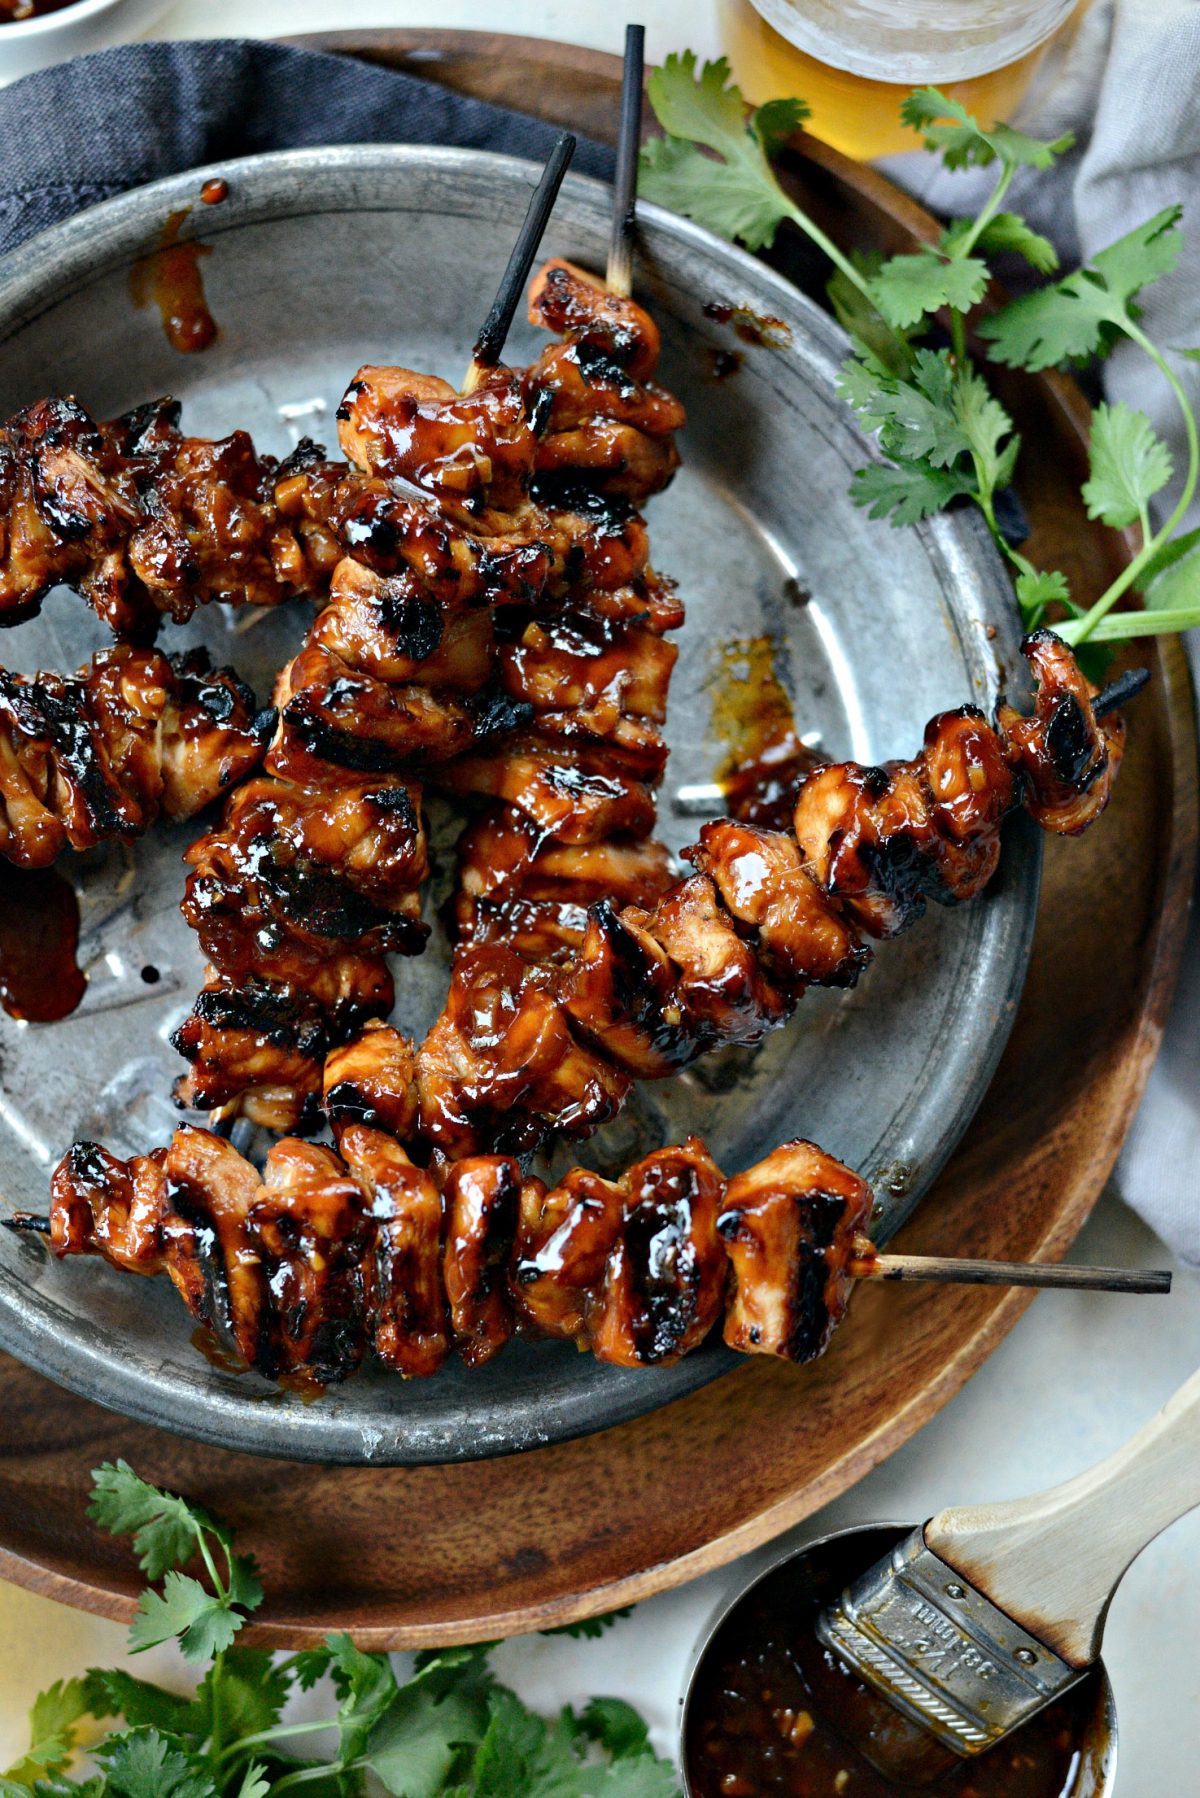 Grilled-Sticky-Sweet-Chicken-Skewers-l-SimplyScratch.com-15